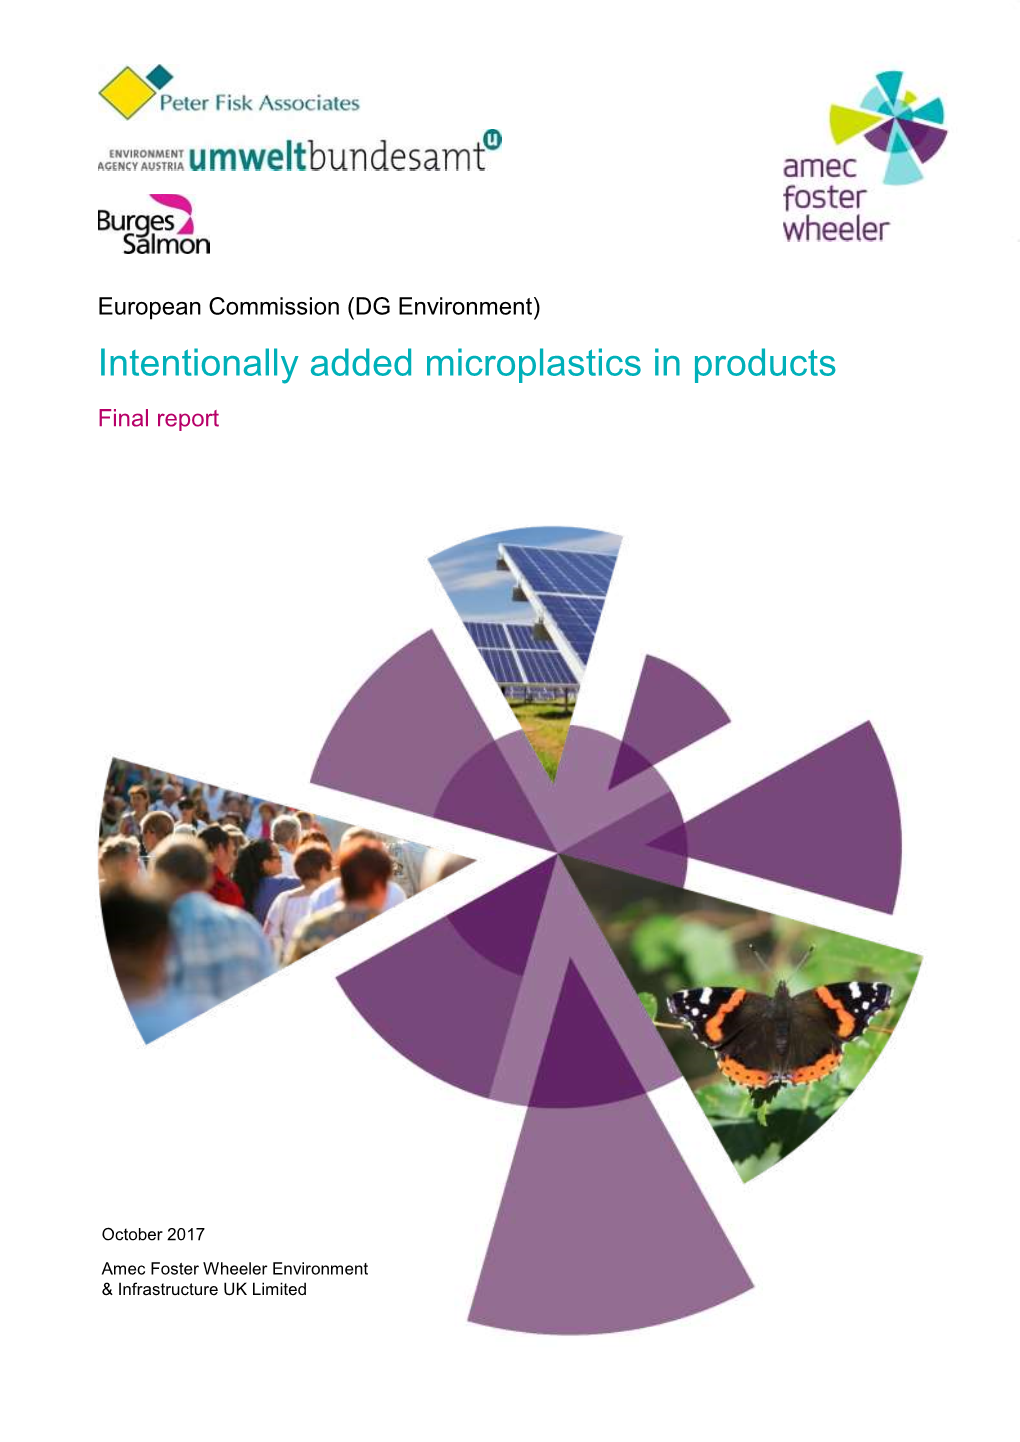 Intentionally Added Microplastics in Products Final Report